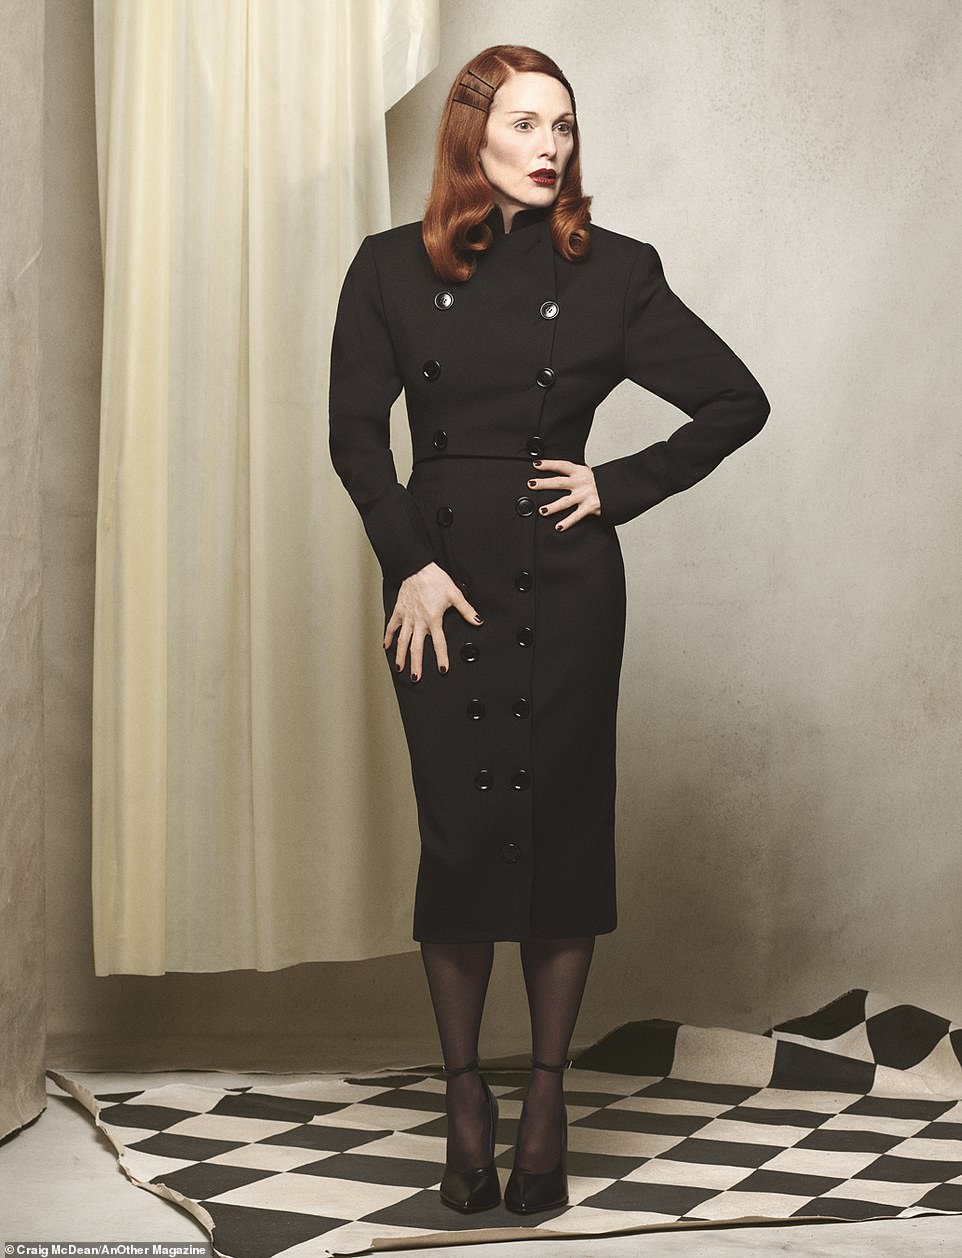 In another photo, Julianne wears a wool gabardine jacket and an Alaia dress that could have come straight out of a detective agency in a film noir.